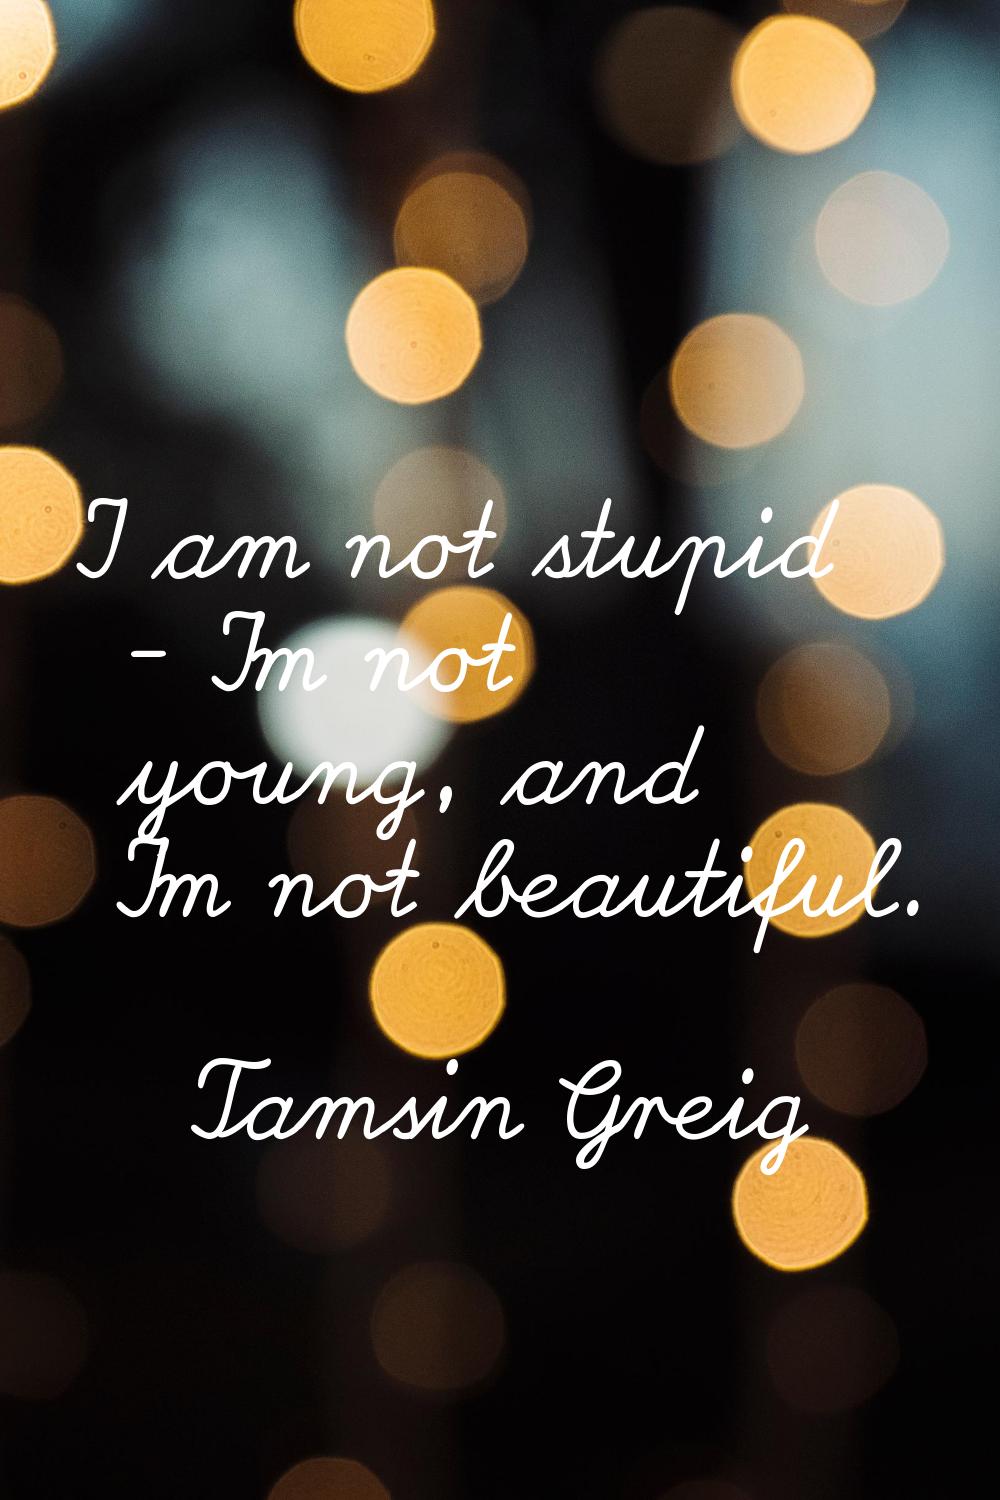 I am not stupid - I'm not young, and I'm not beautiful.